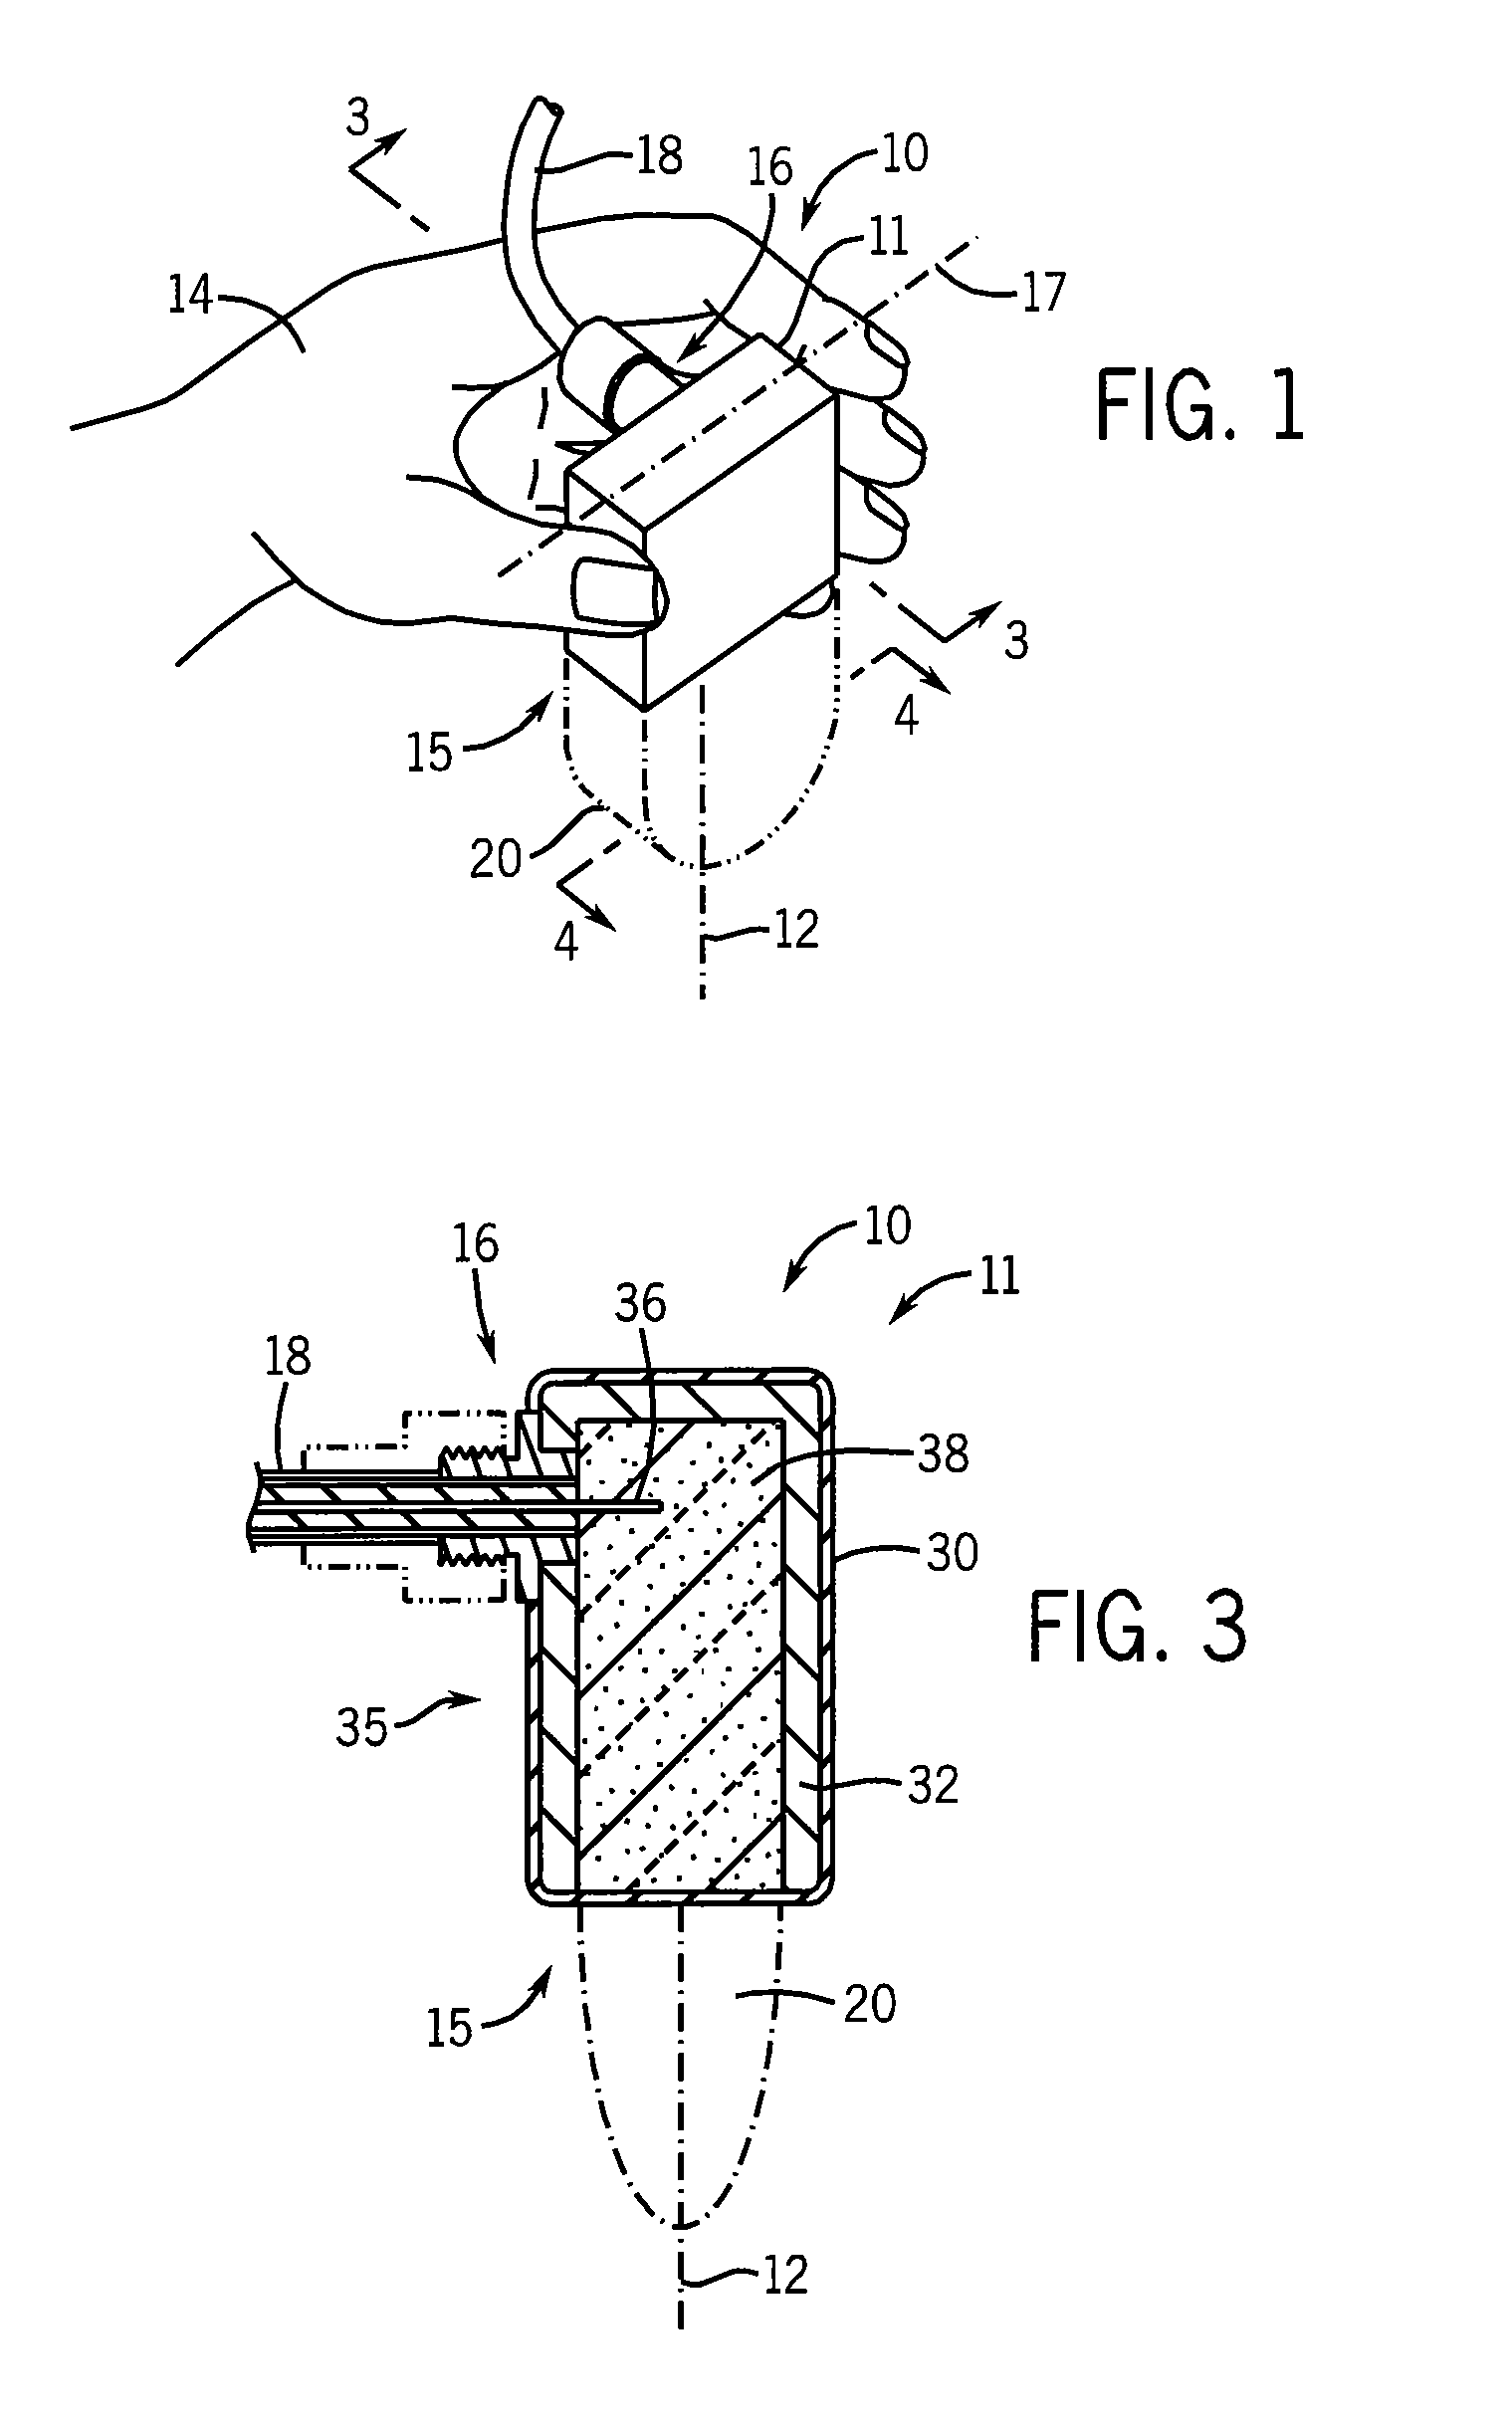 Fan-beam microwave horn for bloodless resection